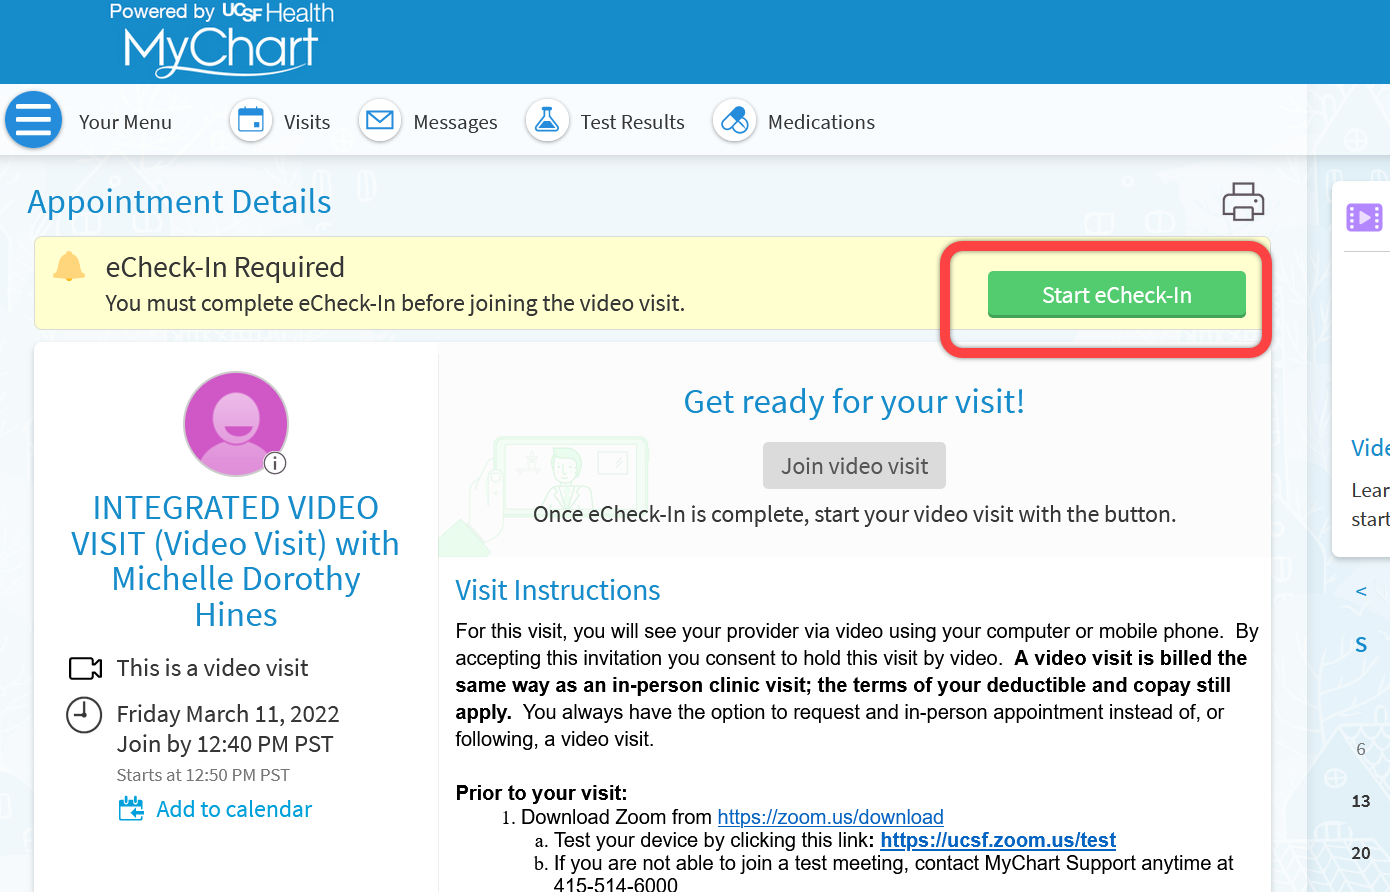 Screenshot of MyChart website with "Start eCheck-in" outlined in red